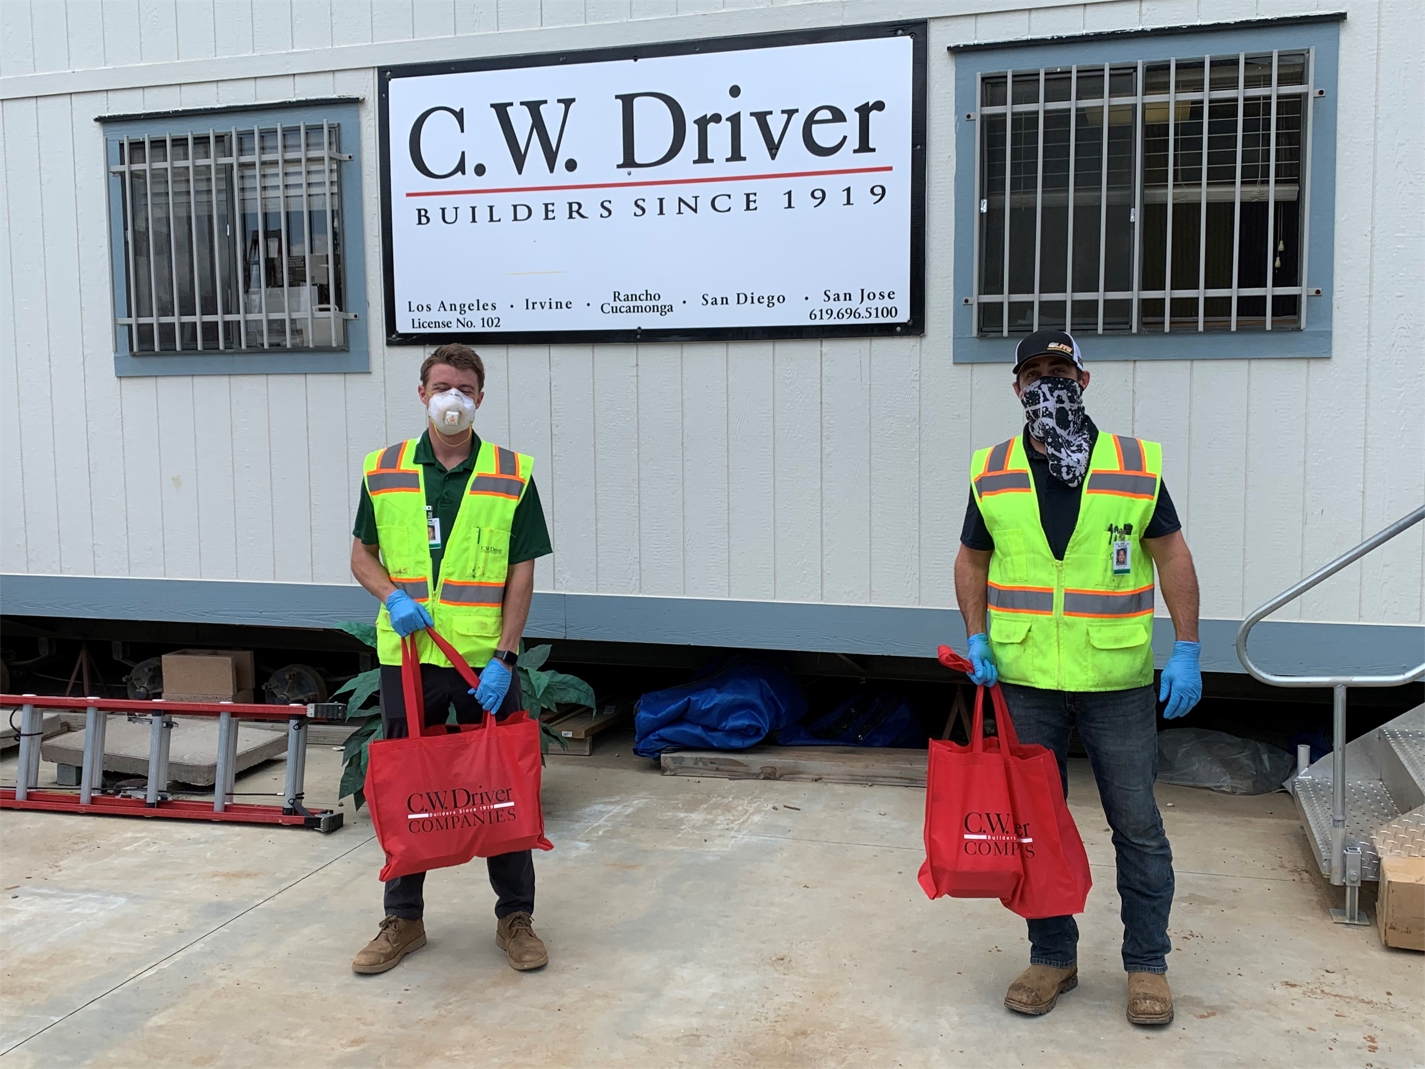 In April 2020, C.W. Driver Companies had the pleasure of delivering over 300 meals to our frontline employees and their families as a token of our immense gratitude for moving our projects forward without hesitation during these unprecedented times.